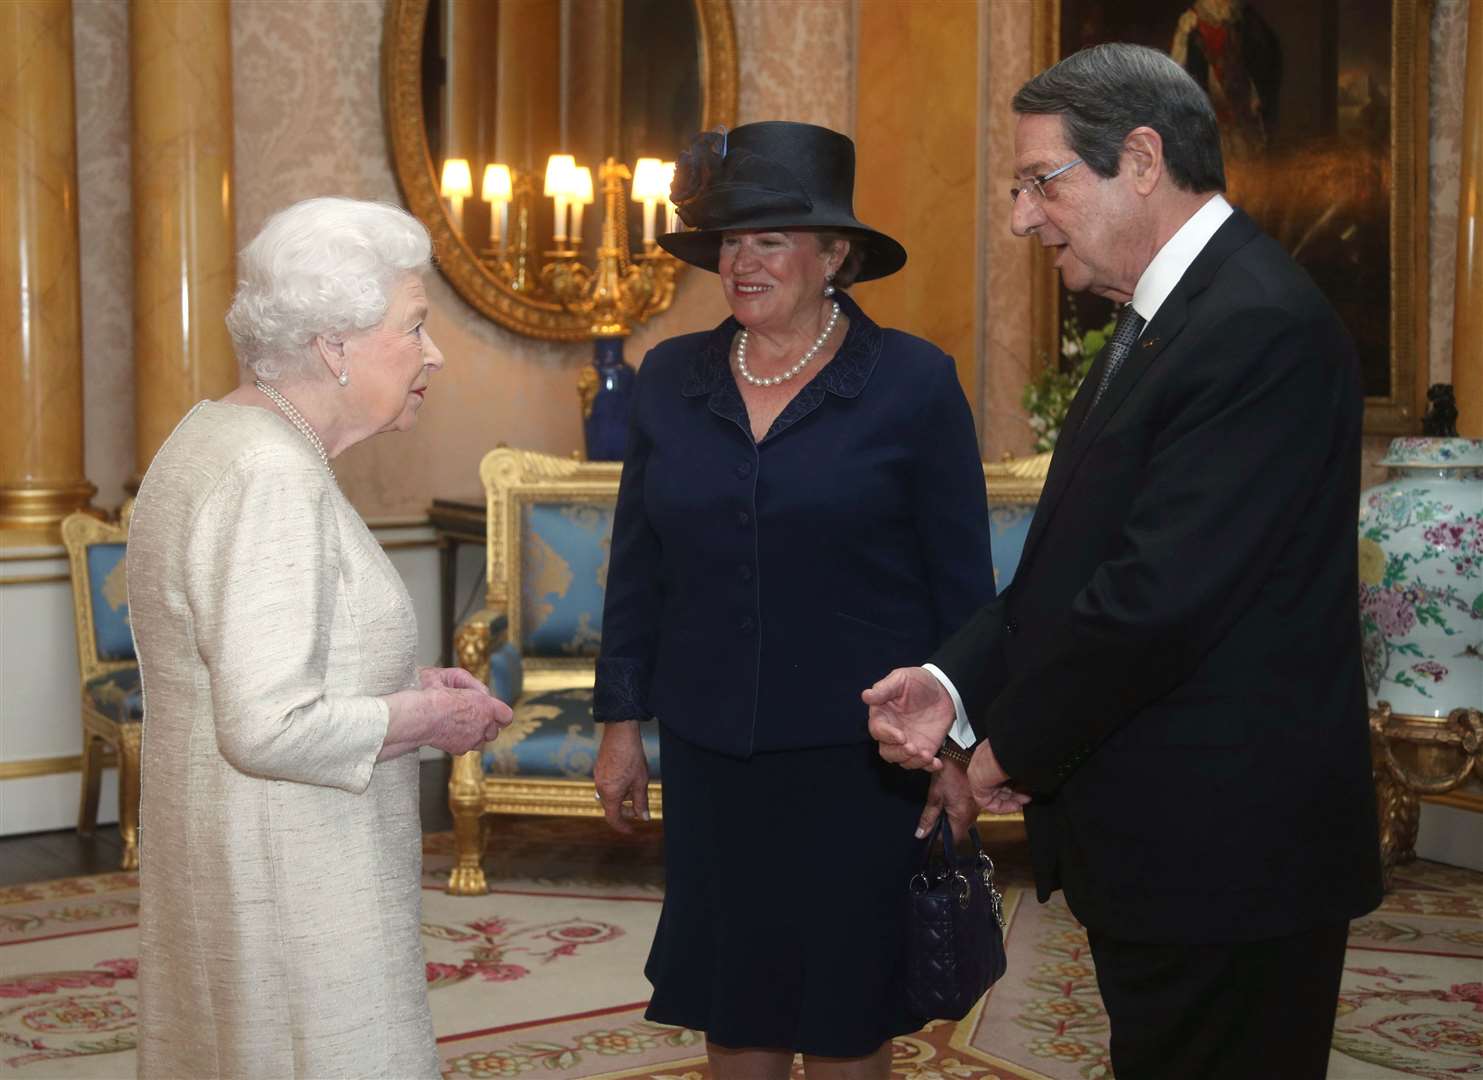 President of the Republic of Cyprus Nicos Anastasiades and his wife, Andri Anastasiades, during an audience with the Queen in 2019 (Yui Mok/PA)